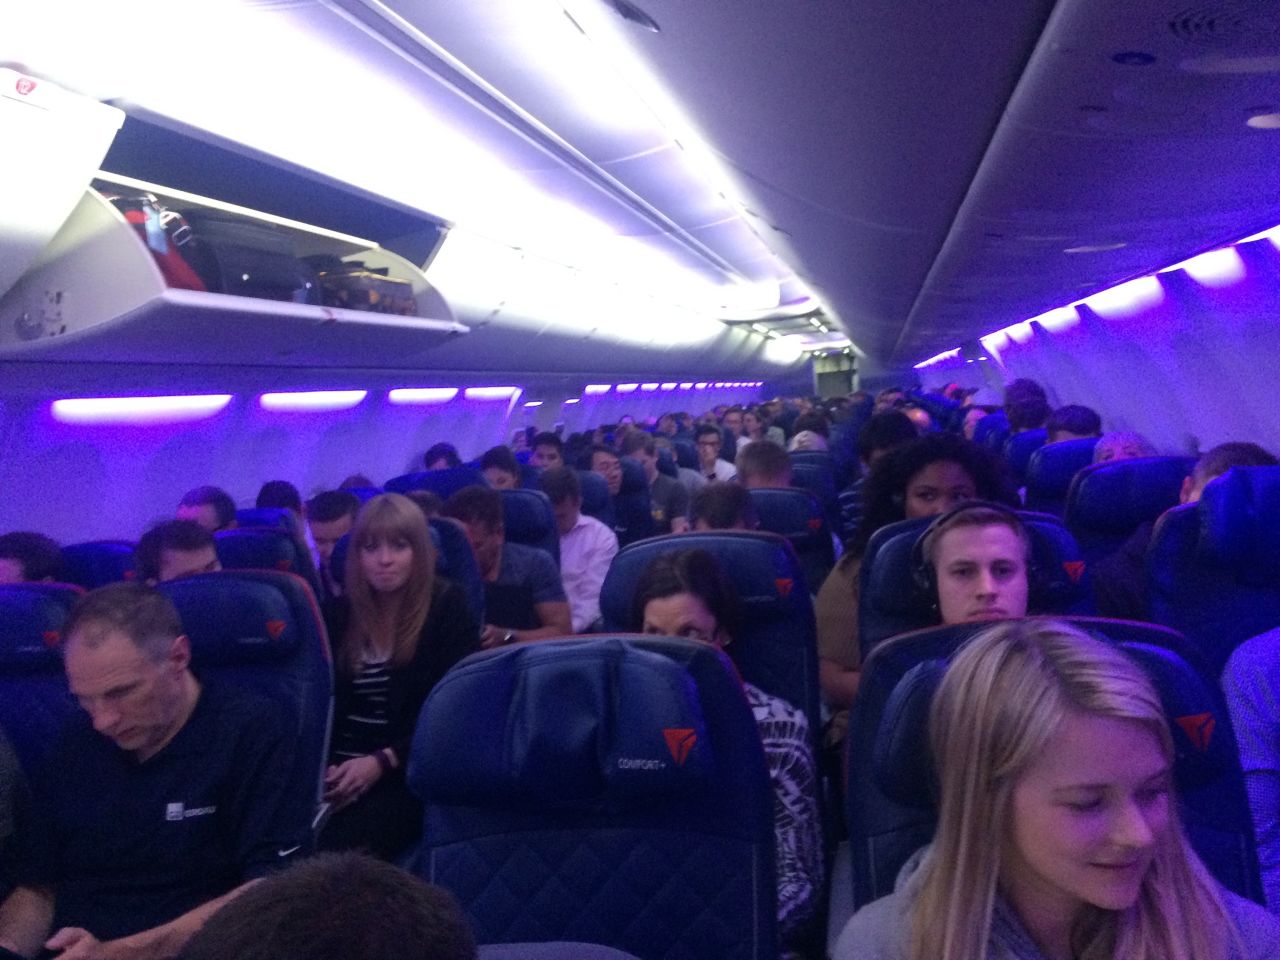 Delta Air Lines Flight 1668 from Los Angeles to Minneapolis shaded its cabin Thursday in the color purple in honor of Prince.